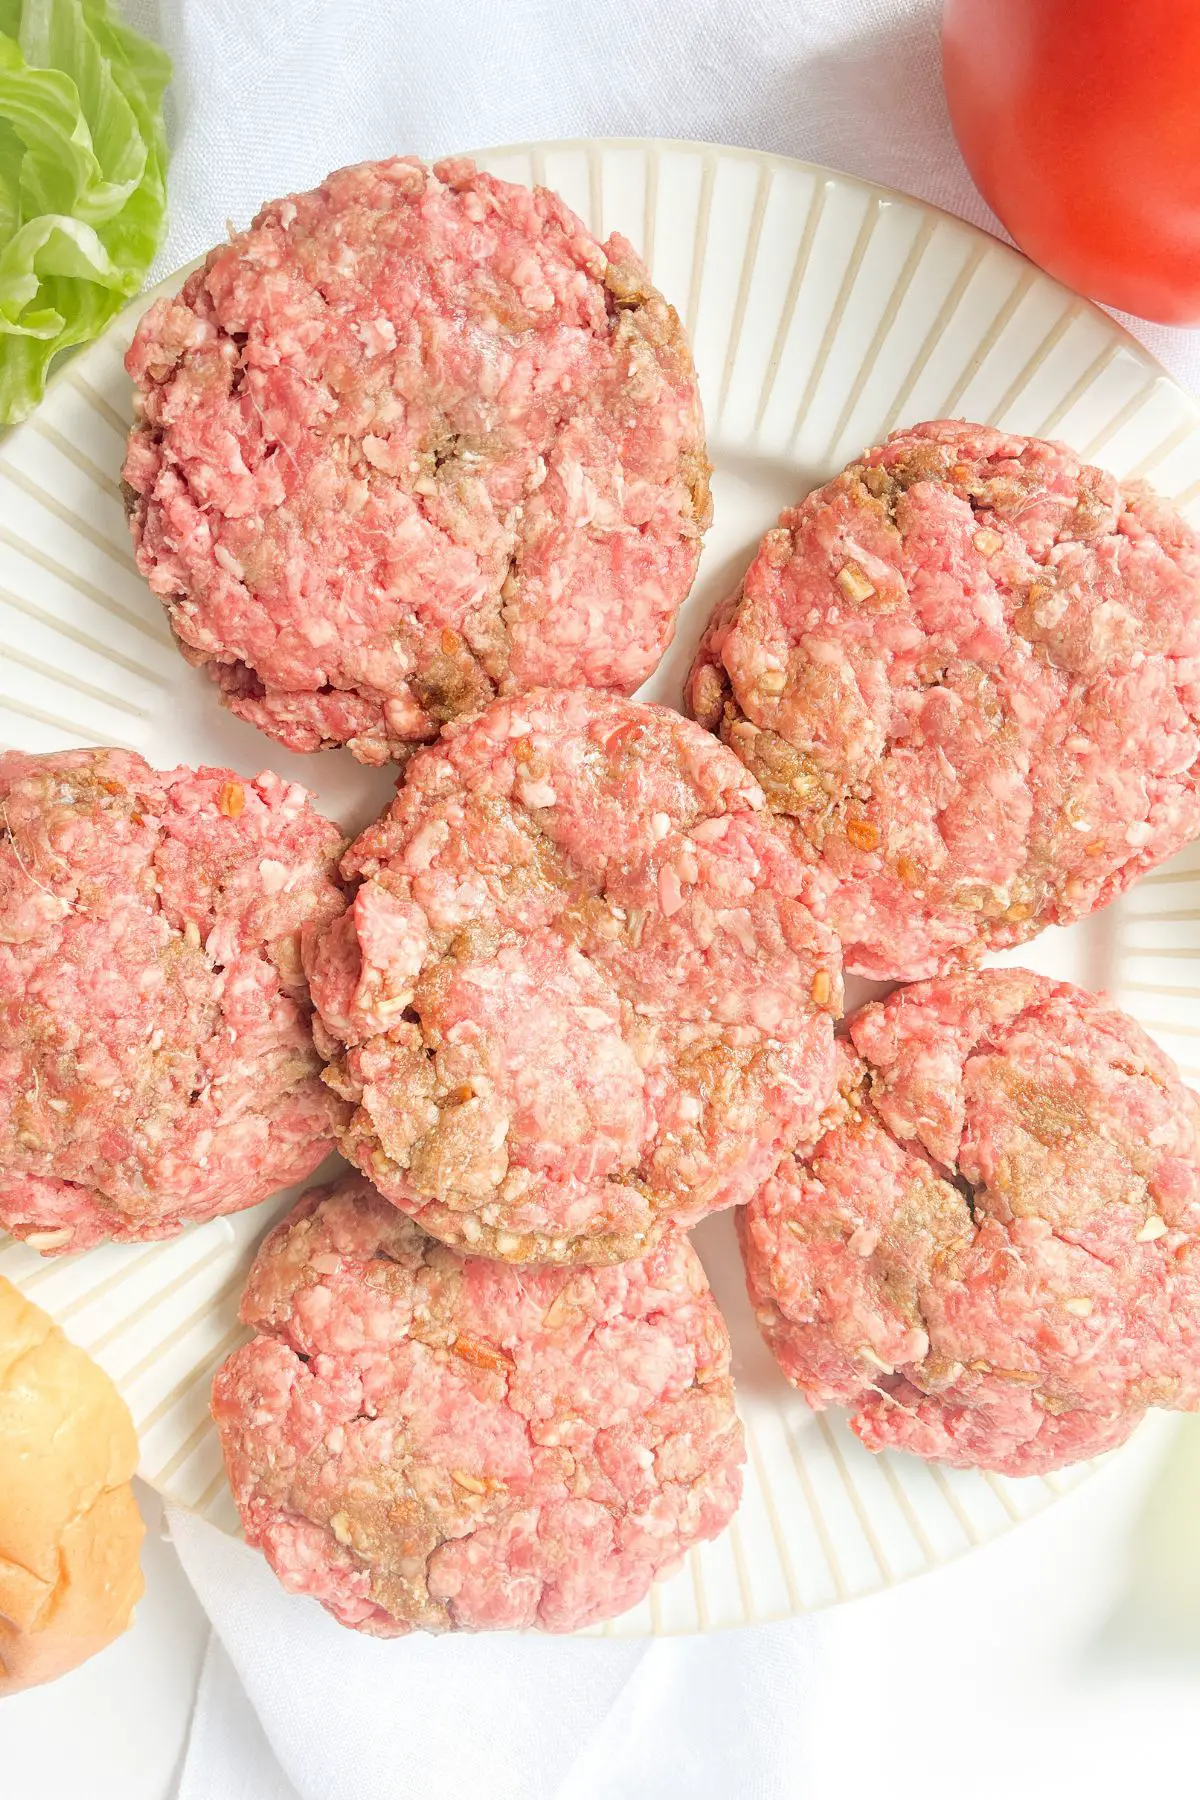 How To Cook Perfect Frozen Burgers In The Oven